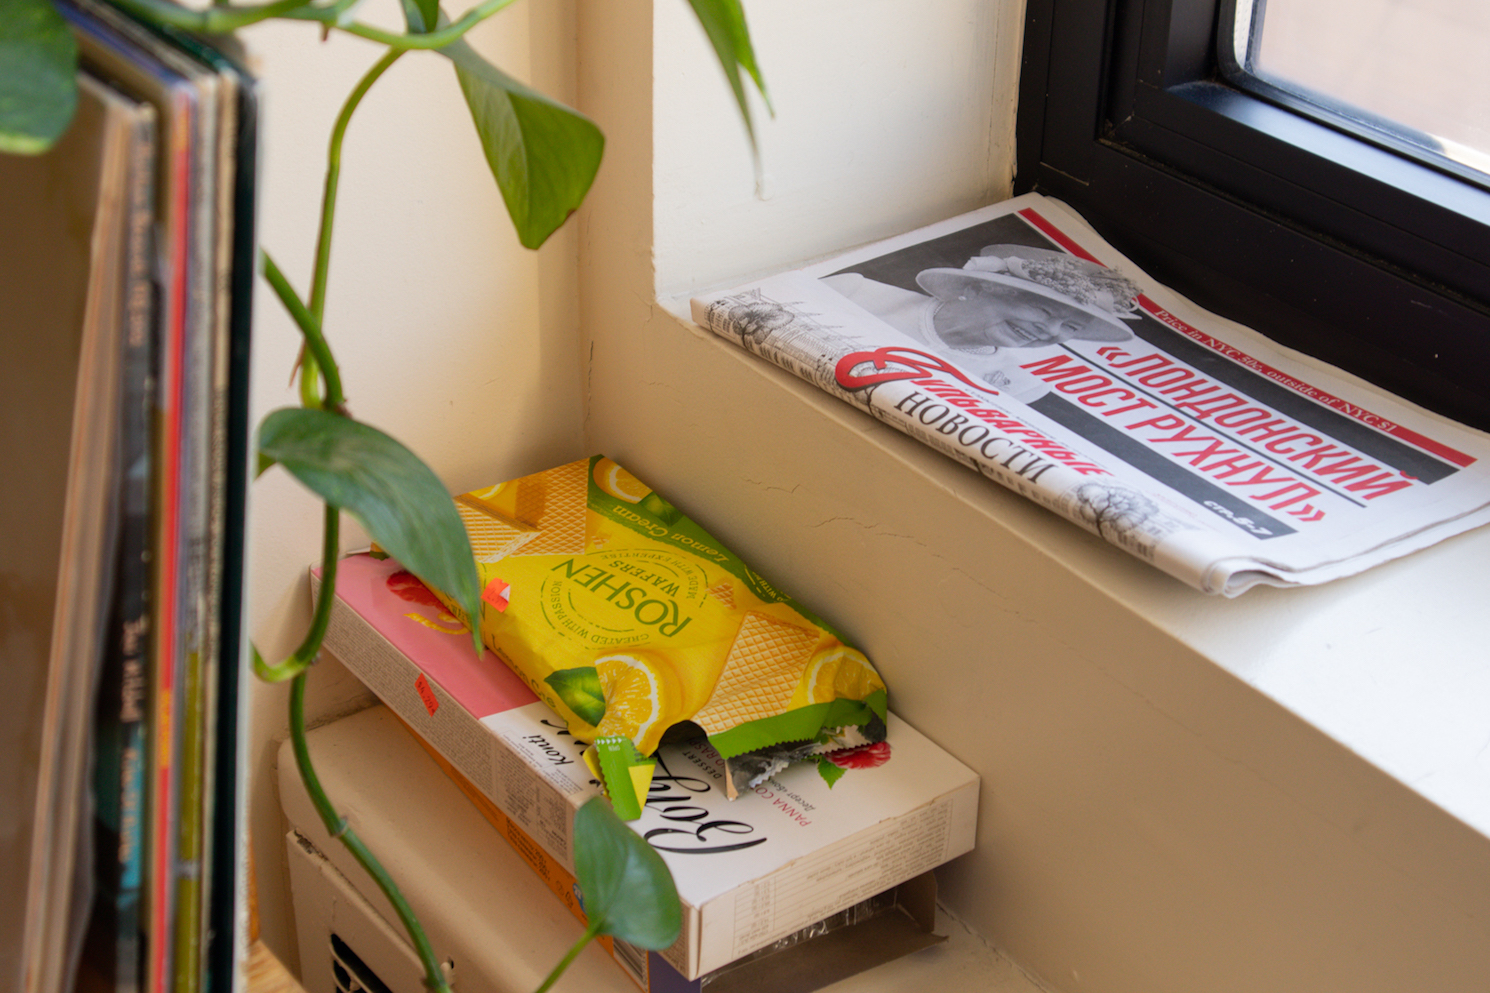 A window ledge with a newspaper and a package of wafers on it.